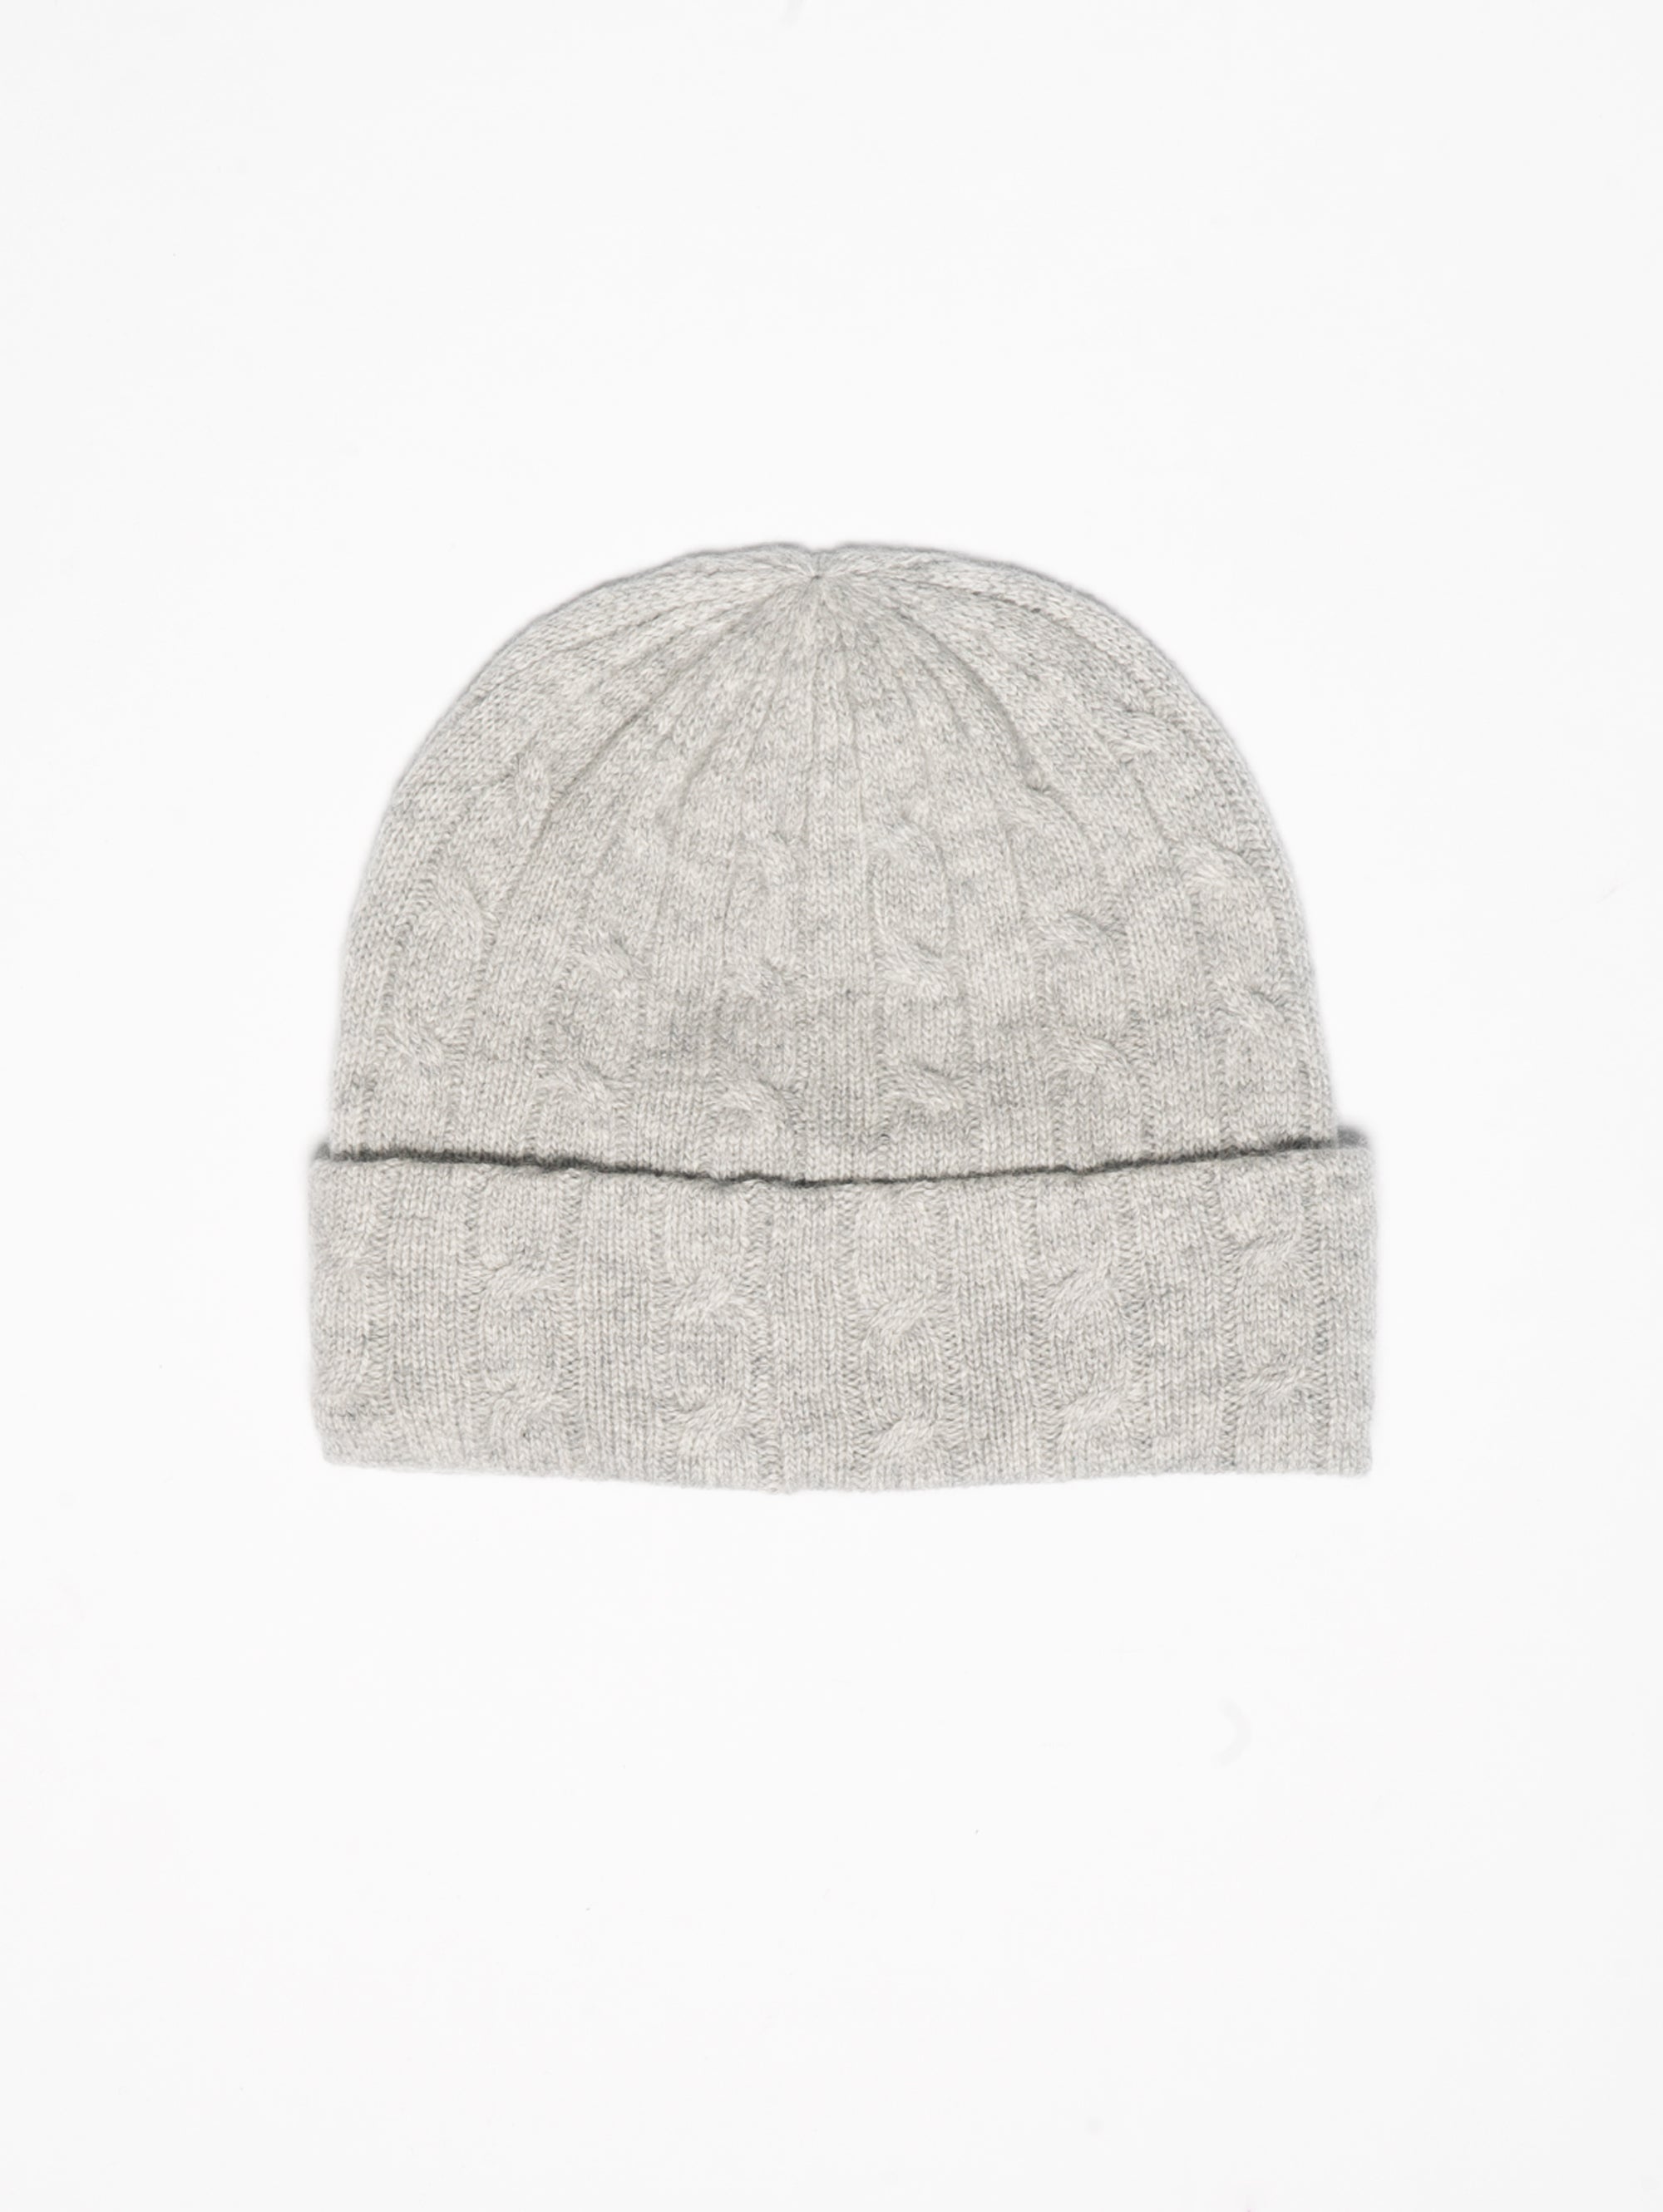 Hat with Gray Wool and Cashmere Braids